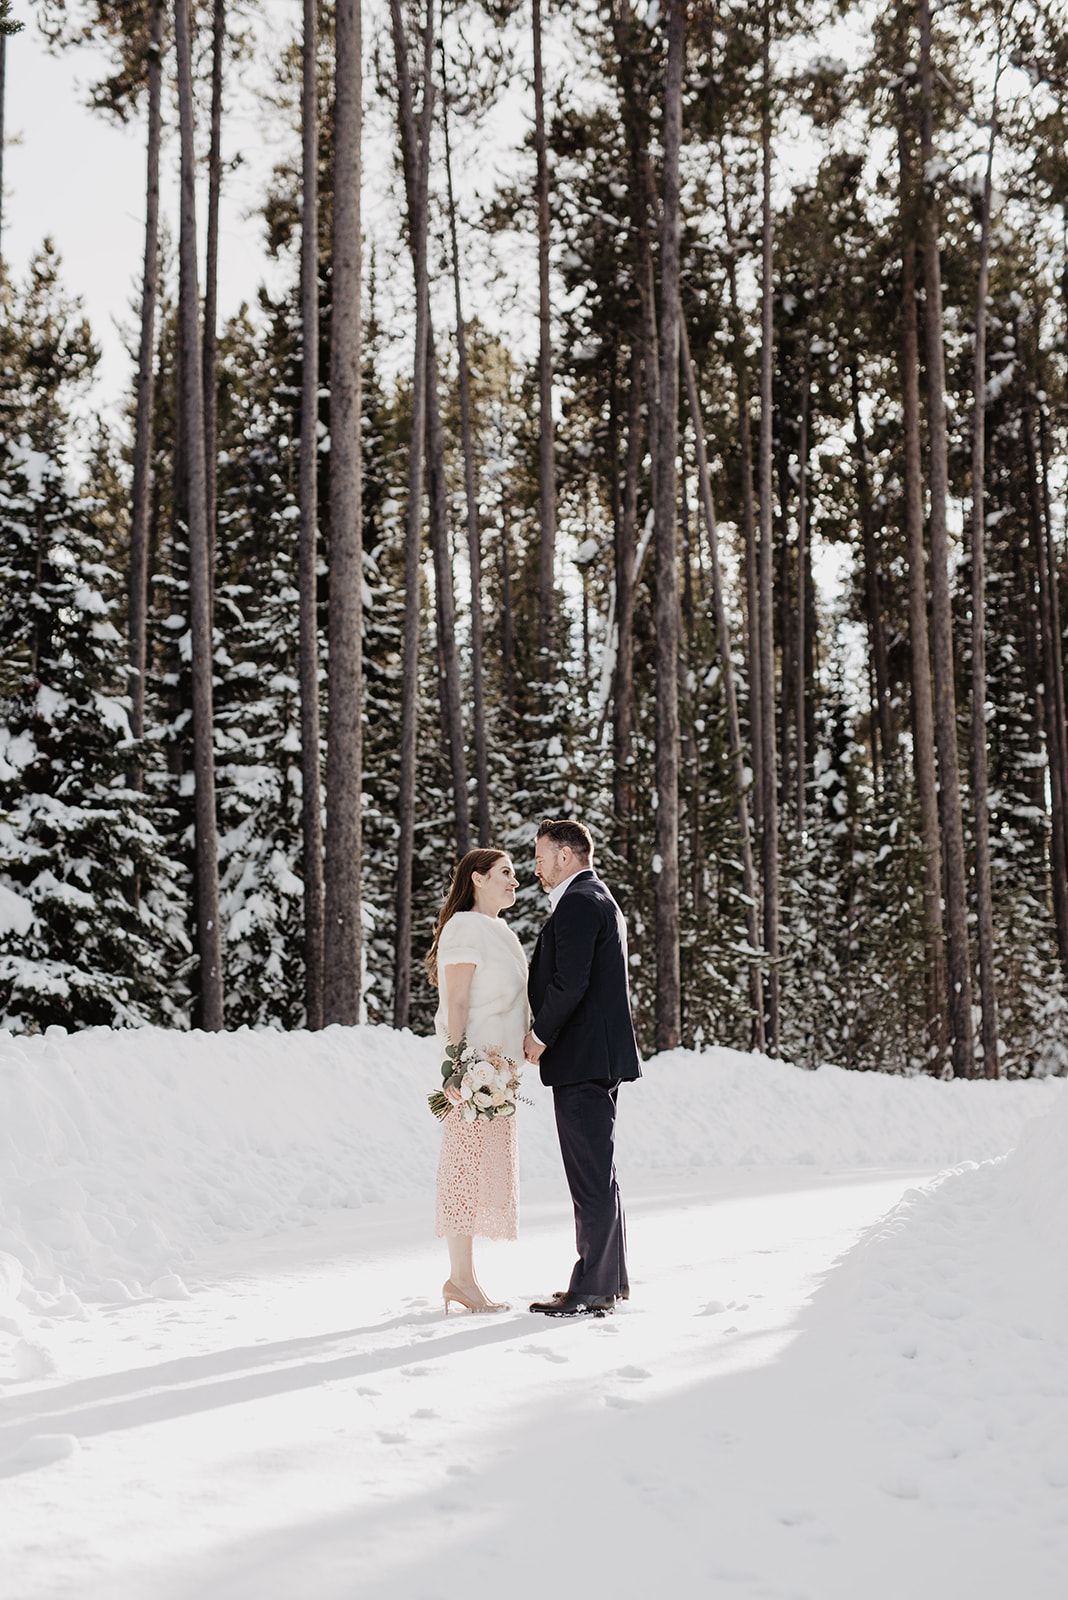 Jackson Hole wedding photographer captured bride and groom leaning into each other romantically in a pine wood forest for their winter wedding